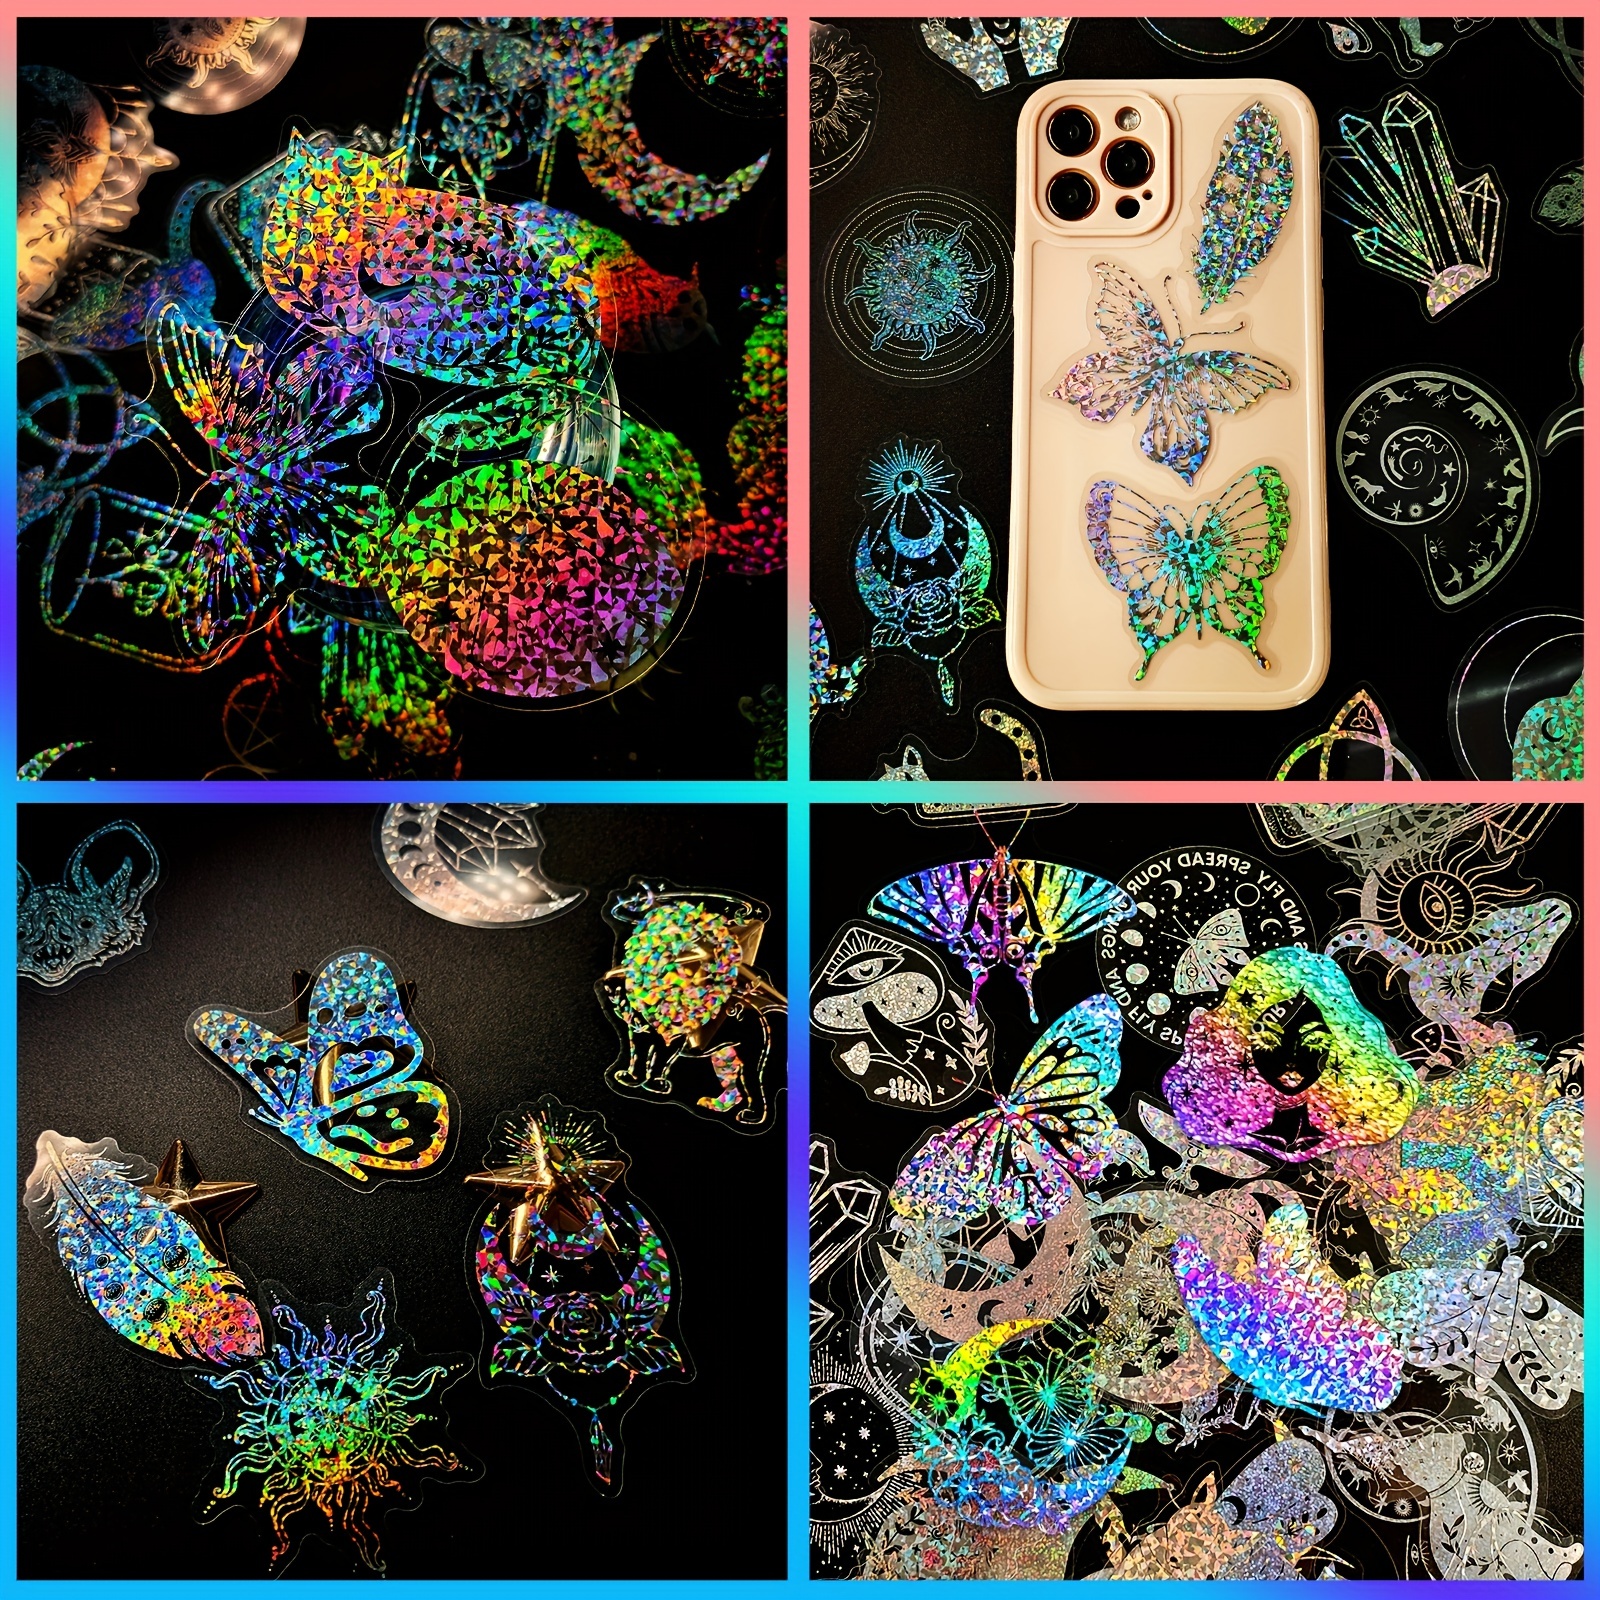 300 Pcs Holographic Stickers, Resin Stickers for Art Craft, Stickers for Resin Including Magic World, Butterfly Theme, Colorful Laser Stickers Decal